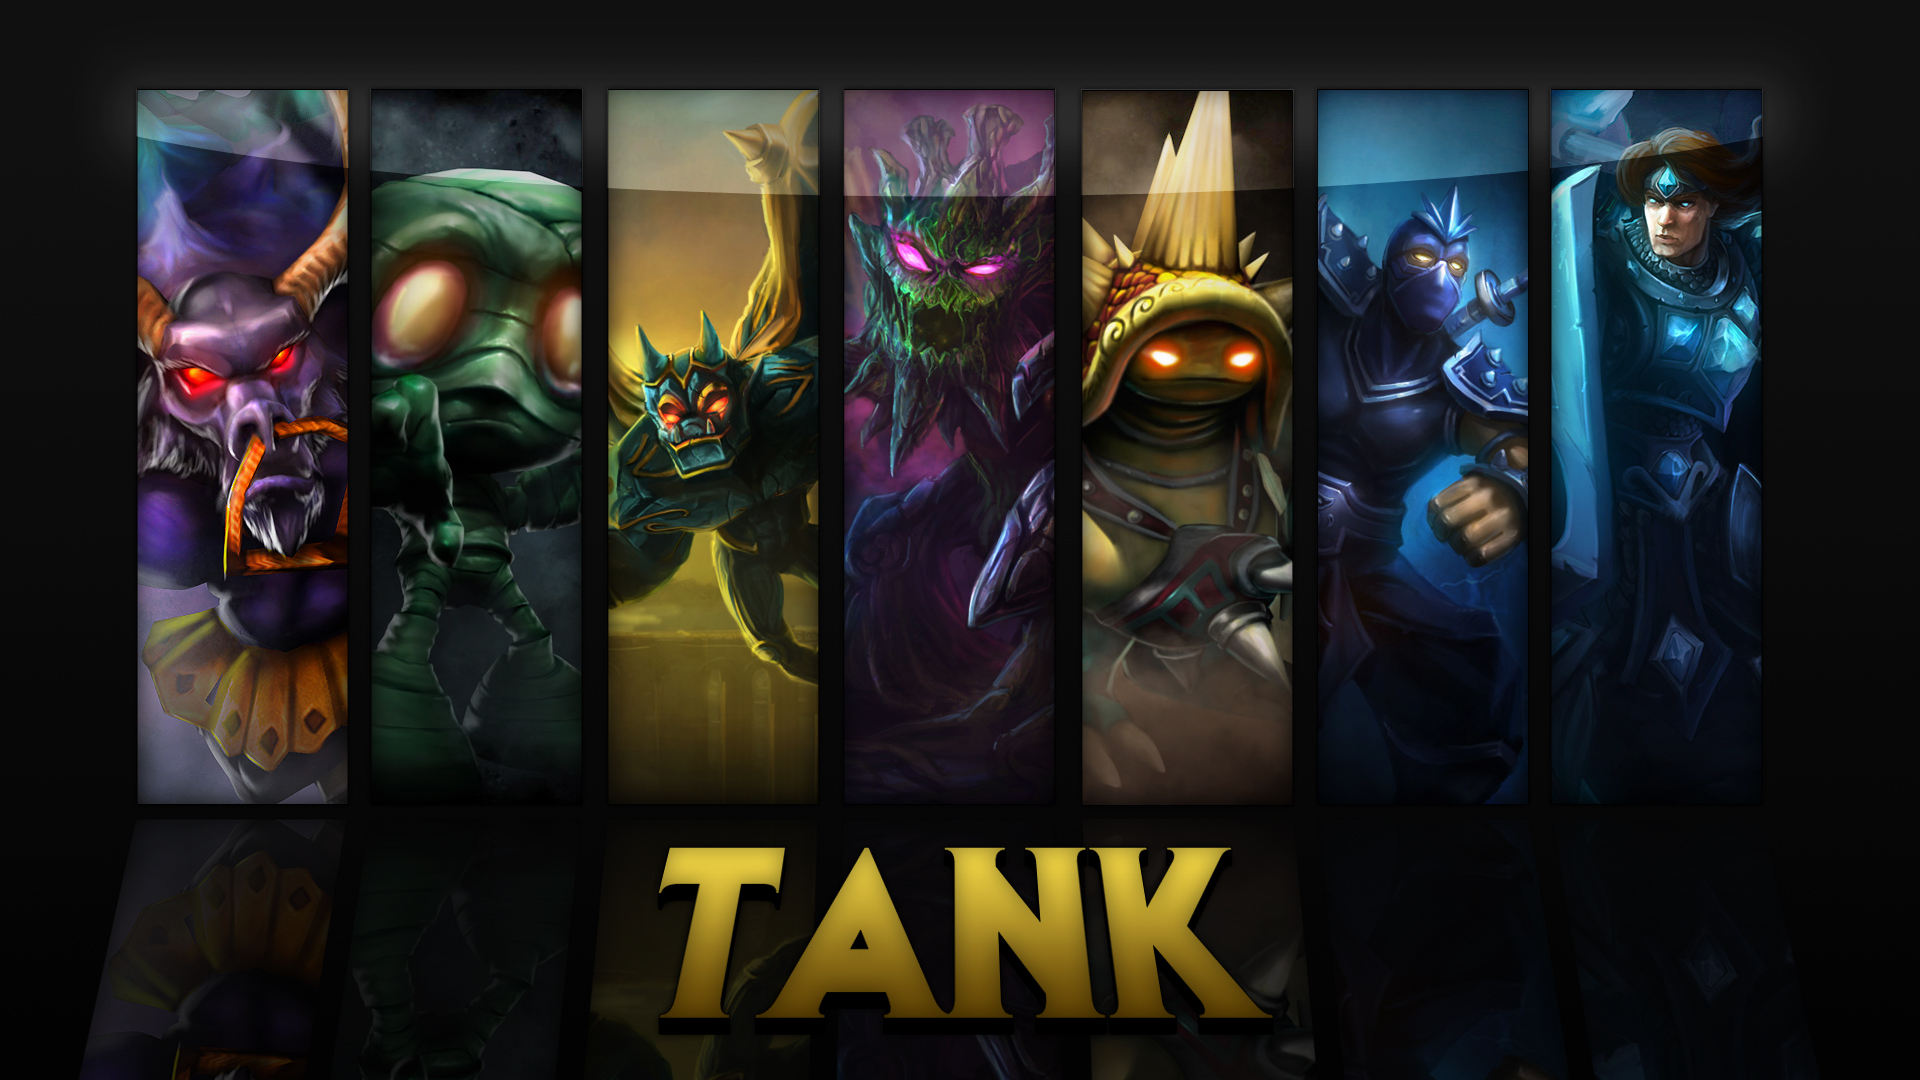 Go mad the first doorway League of Legends Tag: Tank by mwGorrion on DeviantArt